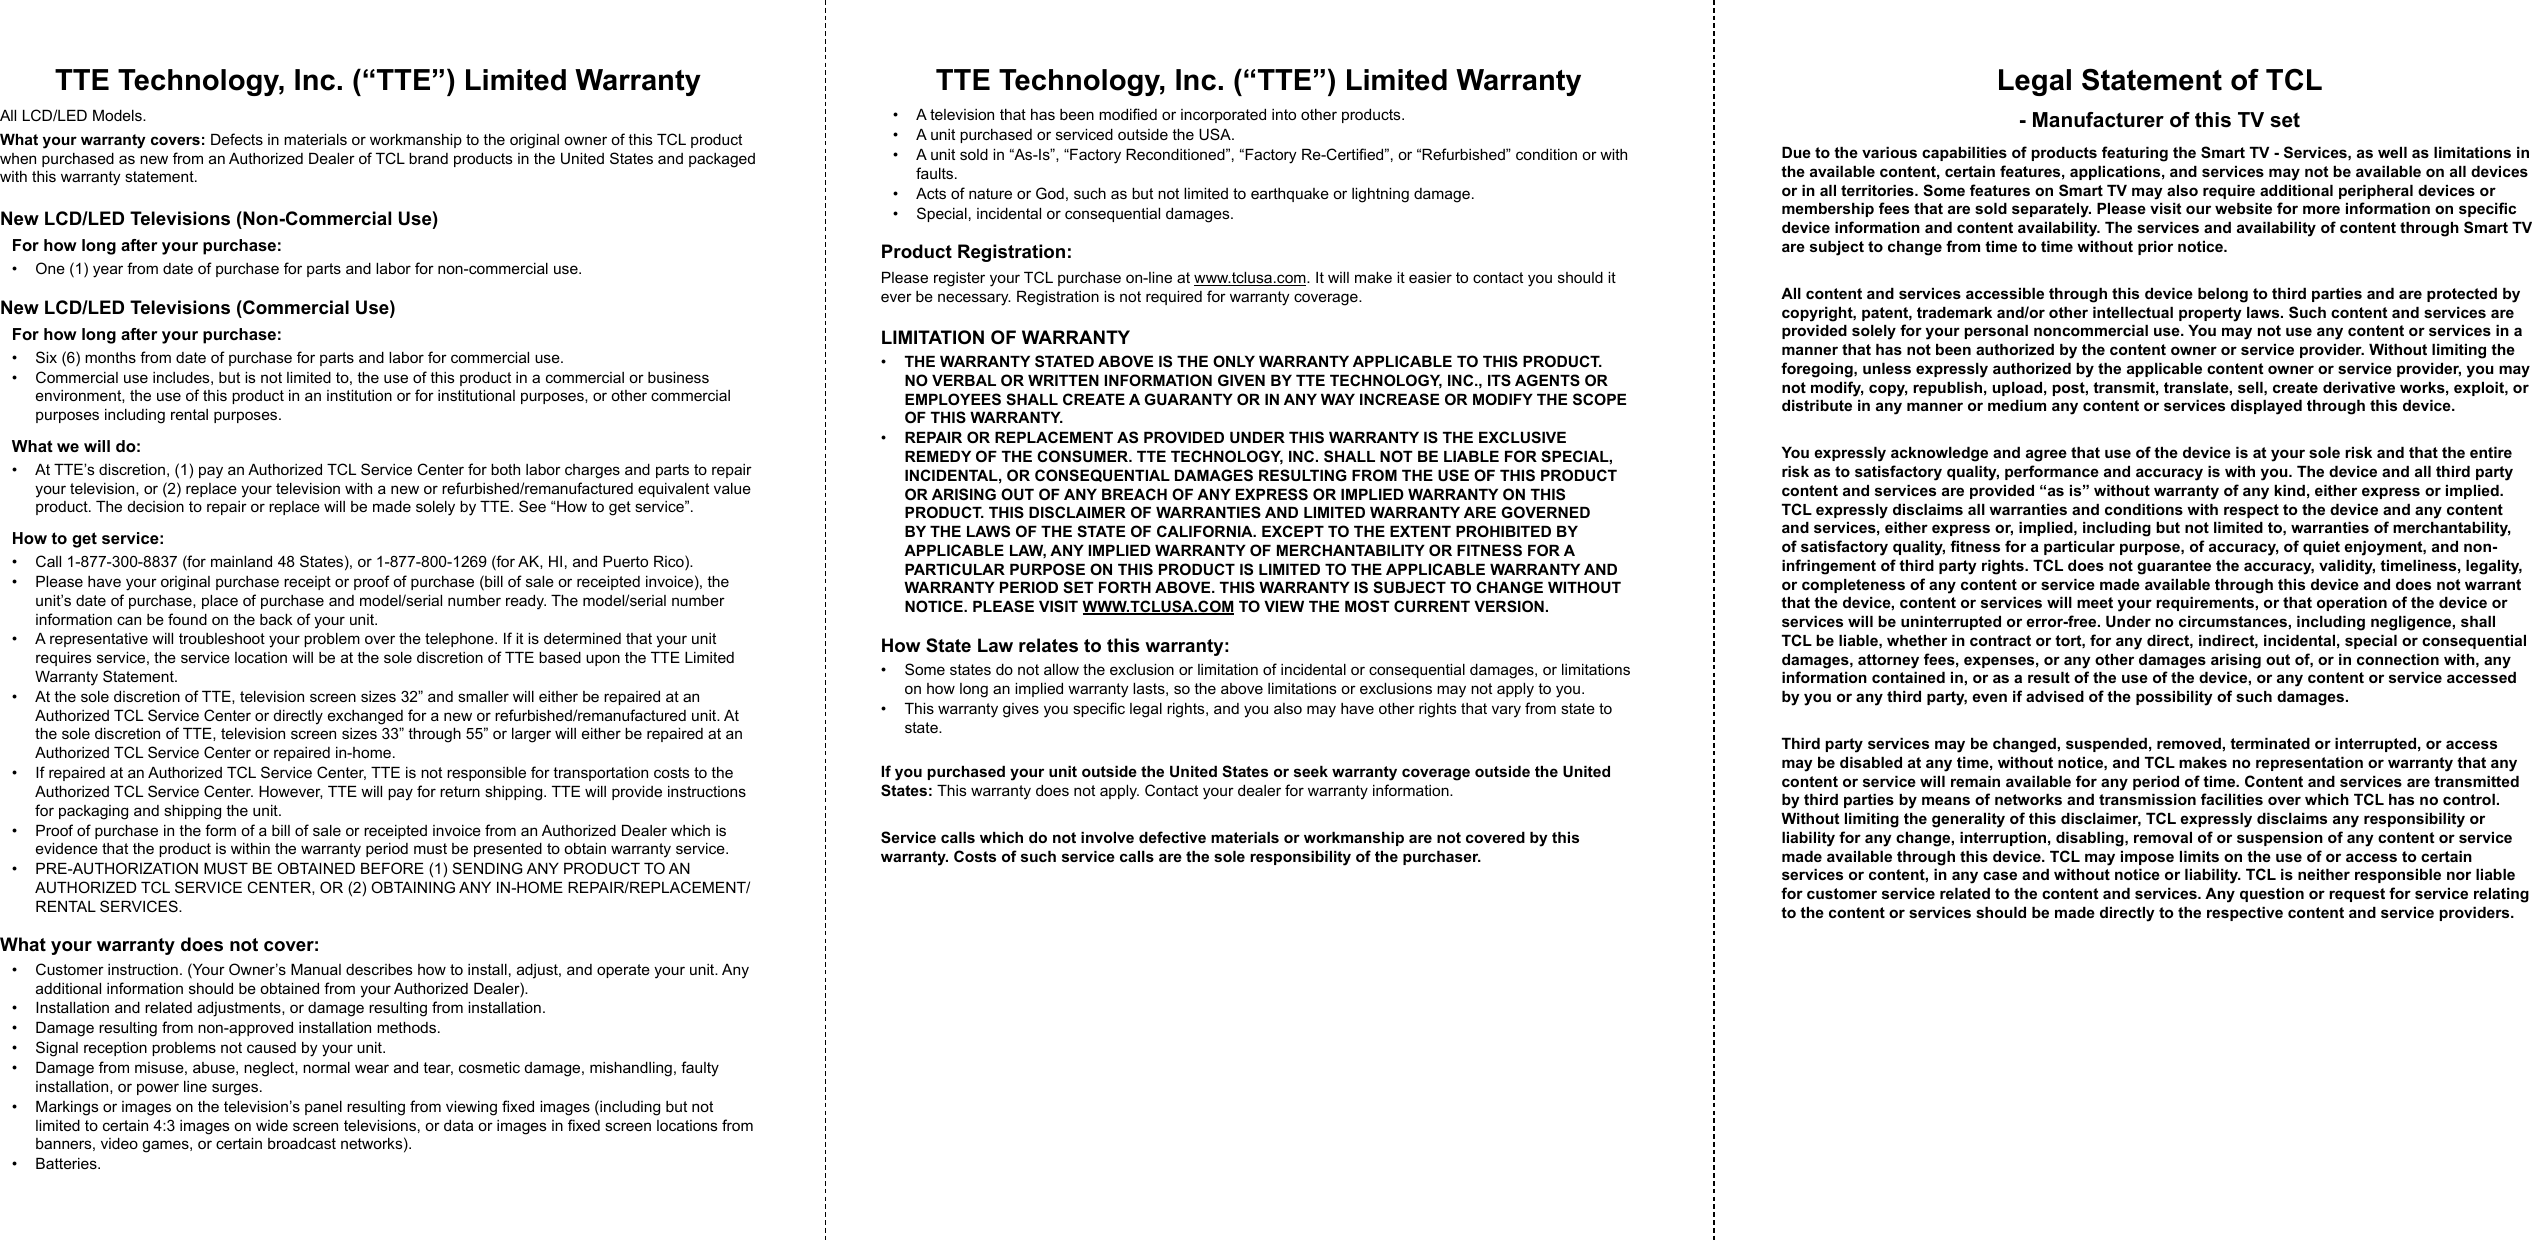 TTE Technology, Inc. (“TTE”) Limited WarrantyAll LCD/LED Models.What your warranty covers: Defects in materials or workmanship to the original owner of this TCL product when purchased as new from an Authorized Dealer of TCL brand products in the United States and packaged with this warranty statement.New LCD/LED Televisions (Non-Commercial Use)For how long after your purchase:•  One (1) year from date of purchase for parts and labor for non-commercial use.New LCD/LED Televisions (Commercial Use)For how long after your purchase:•  Six (6) months from date of purchase for parts and labor for commercial use.•  Commercial use includes, but is not limited to, the use of this product in a commercial or business environment, the use of this product in an institution or for institutional purposes, or other commercial purposes including rental purposes.What we will do:•  At TTE’s discretion, (1) pay an Authorized TCL Service Center for both labor charges and parts to repair your television, or (2) replace your television with a new or refurbished/remanufactured equivalent value product. The decision to repair or replace will be made solely by TTE. See “How to get service”.How to get service:•  Call 1-877-300-8837 (for mainland 48 States), or 1-877-800-1269 (for AK, HI, and Puerto Rico).•  Please have your original purchase receipt or proof of purchase (bill of sale or receipted invoice), the unit’s date of purchase, place of purchase and model/serial number ready. The model/serial number information can be found on the back of your unit.•  A representative will troubleshoot your problem over the telephone. If it is determined that your unit requires service, the service location will be at the sole discretion of TTE based upon the TTE Limited Warranty Statement.•  At the sole discretion of TTE, television screen sizes 32” and smaller will either be repaired at an Authorized TCL Service Center or directly exchanged for a new or refurbished/remanufactured unit. At the sole discretion of TTE, television screen sizes 33” through 55” or larger will either be repaired at an Authorized TCL Service Center or repaired in-home.•  If repaired at an Authorized TCL Service Center, TTE is not responsible for transportation costs to the Authorized TCL Service Center. However, TTE will pay for return shipping. TTE will provide instructions for packaging and shipping the unit.•  Proof of purchase in the form of a bill of sale or receipted invoice from an Authorized Dealer which is evidence that the product is within the warranty period must be presented to obtain warranty service.•  PRE-AUTHORIZATION MUST BE OBTAINED BEFORE (1) SENDING ANY PRODUCT TO AN AUTHORIZED TCL SERVICE CENTER, OR (2) OBTAINING ANY IN-HOME REPAIR/REPLACEMENT/RENTAL SERVICES.What your warranty does not cover:•  Customer instruction. (Your Owner’s Manual describes how to install, adjust, and operate your unit. Any additional information should be obtained from your Authorized Dealer).•  Installation and related adjustments, or damage resulting from installation.•  Damage resulting from non-approved installation methods.•  Signal reception problems not caused by your unit.•  Damage from misuse, abuse, neglect, normal wear and tear, cosmetic damage, mishandling, faulty installation, or power line surges.•  Markings or images on the television’s panel resulting from viewing xed images (including but not limited to certain 4:3 images on wide screen televisions, or data or images in xed screen locations from banners, video games, or certain broadcast networks).•  Batteries.TTE Technology, Inc. (“TTE”) Limited Warranty•  A television that has been modied or incorporated into other products.•  A unit purchased or serviced outside the USA.•  A unit sold in “As-Is”, “Factory Reconditioned”, “Factory Re-Certied”, or “Refurbished” condition or with faults.•  Acts of nature or God, such as but not limited to earthquake or lightning damage.•  Special, incidental or consequential damages.Product Registration:Please register your TCL purchase on-line at www.tclusa.com. It will make it easier to contact you should it ever be necessary. Registration is not required for warranty coverage.LIMITATION OF WARRANTY•  THE WARRANTY STATED ABOVE IS THE ONLY WARRANTY APPLICABLE TO THIS PRODUCT. NO VERBAL OR WRITTEN INFORMATION GIVEN BY TTE TECHNOLOGY, INC., ITS AGENTS OR EMPLOYEES SHALL CREATE A GUARANTY OR IN ANY WAY INCREASE OR MODIFY THE SCOPE OF THIS WARRANTY.•  REPAIR OR REPLACEMENT AS PROVIDED UNDER THIS WARRANTY IS THE EXCLUSIVE REMEDY OF THE CONSUMER. TTE TECHNOLOGY, INC. SHALL NOT BE LIABLE FOR SPECIAL, INCIDENTAL, OR CONSEQUENTIAL DAMAGES RESULTING FROM THE USE OF THIS PRODUCT OR ARISING OUT OF ANY BREACH OF ANY EXPRESS OR IMPLIED WARRANTY ON THIS PRODUCT. THIS DISCLAIMER OF WARRANTIES AND LIMITED WARRANTY ARE GOVERNED BY THE LAWS OF THE STATE OF CALIFORNIA. EXCEPT TO THE EXTENT PROHIBITED BY APPLICABLE LAW, ANY IMPLIED WARRANTY OF MERCHANTABILITY OR FITNESS FOR A PARTICULAR PURPOSE ON THIS PRODUCT IS LIMITED TO THE APPLICABLE WARRANTY AND WARRANTY PERIOD SET FORTH ABOVE. THIS WARRANTY IS SUBJECT TO CHANGE WITHOUT NOTICE. PLEASE VISIT WWW.TCLUSA.COM TO VIEW THE MOST CURRENT VERSION.How State Law relates to this warranty:•  Some states do not allow the exclusion or limitation of incidental or consequential damages, or limitations on how long an implied warranty lasts, so the above limitations or exclusions may not apply to you.•  This warranty gives you specic legal rights, and you also may have other rights that vary from state to state.If you purchased your unit outside the United States or seek warranty coverage outside the United States: This warranty does not apply. Contact your dealer for warranty information.Service calls which do not involve defective materials or workmanship are not covered by this warranty. Costs of such service calls are the sole responsibility of the purchaser.Legal Statement of TCL - Manufacturer of this TV setDue to the various capabilities of products featuring the Smart TV - Services, as well as limitations in the available content, certain features, applications, and services may not be available on all devices or in all territories. Some features on Smart TV may also require additional peripheral devices or membership fees that are sold separately. Please visit our website for more information on specic device information and content availability. The services and availability of content through Smart TV are subject to change from time to time without prior notice.All content and services accessible through this device belong to third parties and are protected by copyright, patent, trademark and/or other intellectual property laws. Such content and services are provided solely for your personal noncommercial use. You may not use any content or services in a manner that has not been authorized by the content owner or service provider. Without limiting the foregoing, unless expressly authorized by the applicable content owner or service provider, you may not modify, copy, republish, upload, post, transmit, translate, sell, create derivative works, exploit, or distribute in any manner or medium any content or services displayed through this device.You expressly acknowledge and agree that use of the device is at your sole risk and that the entire risk as to satisfactory quality, performance and accuracy is with you. The device and all third party content and services are provided “as is” without warranty of any kind, either express or implied. TCL expressly disclaims all warranties and conditions with respect to the device and any content and services, either express or, implied, including but not limited to, warranties of merchantability, of satisfactory quality, tness for a particular purpose, of accuracy, of quiet enjoyment, and non-infringement of third party rights. TCL does not guarantee the accuracy, validity, timeliness, legality, or completeness of any content or service made available through this device and does not warrant that the device, content or services will meet your requirements, or that operation of the device or services will be uninterrupted or error-free. Under no circumstances, including negligence, shall TCL be liable, whether in contract or tort, for any direct, indirect, incidental, special or consequential damages, attorney fees, expenses, or any other damages arising out of, or in connection with, any information contained in, or as a result of the use of the device, or any content or service accessed by you or any third party, even if advised of the possibility of such damages.Third party services may be changed, suspended, removed, terminated or interrupted, or access may be disabled at any time, without notice, and TCL makes no representation or warranty that any content or service will remain available for any period of time. Content and services are transmitted by third parties by means of networks and transmission facilities over which TCL has no control. Without limiting the generality of this disclaimer, TCL expressly disclaims any responsibility or liability for any change, interruption, disabling, removal of or suspension of any content or service made available through this device. TCL may impose limits on the use of or access to certain services or content, in any case and without notice or liability. TCL is neither responsible nor liable for customer service related to the content and services. Any question or request for service relating to the content or services should be made directly to the respective content and service providers.